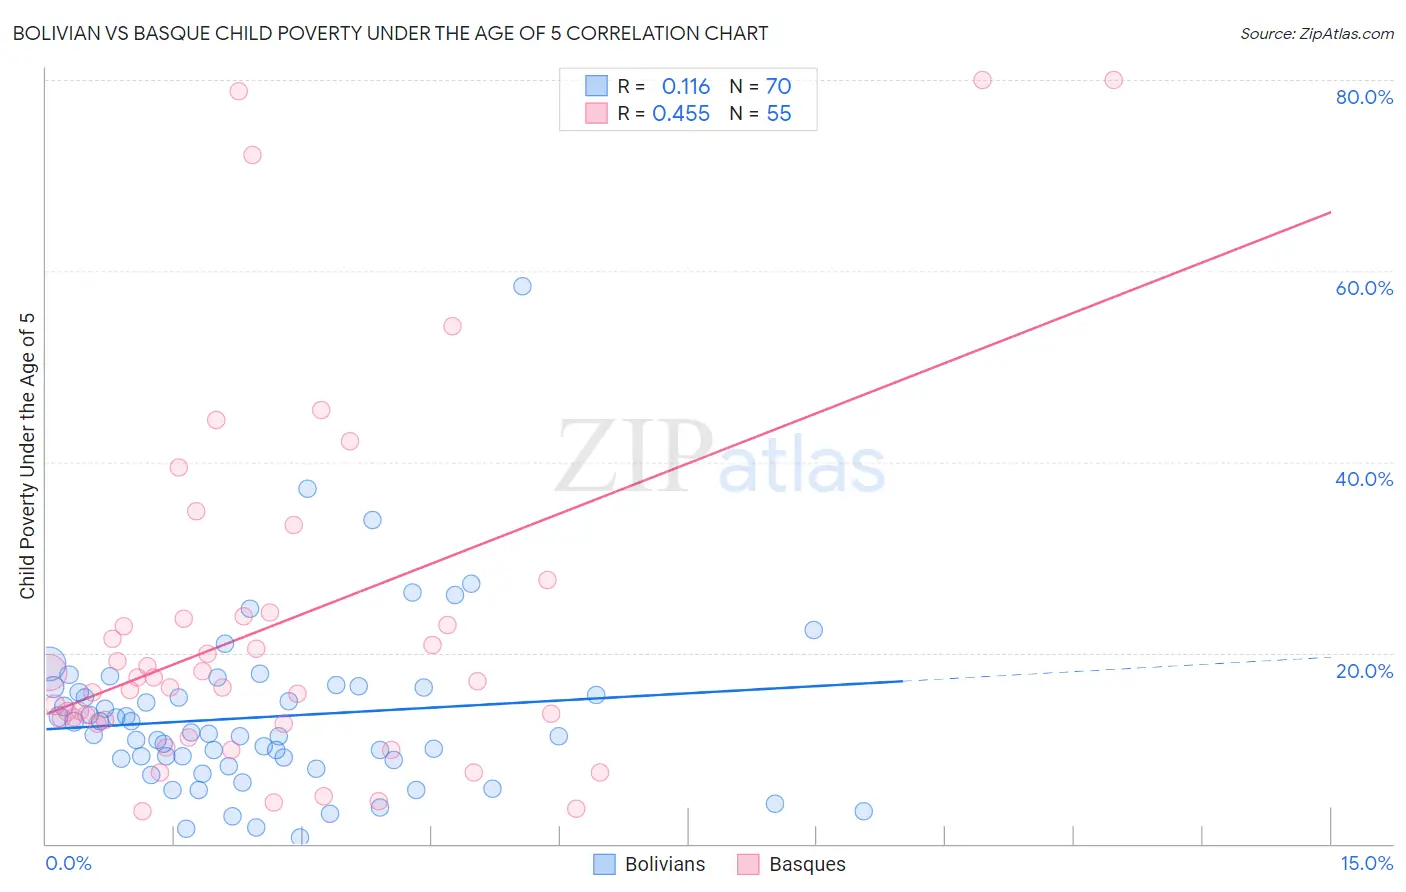 Bolivian vs Basque Child Poverty Under the Age of 5